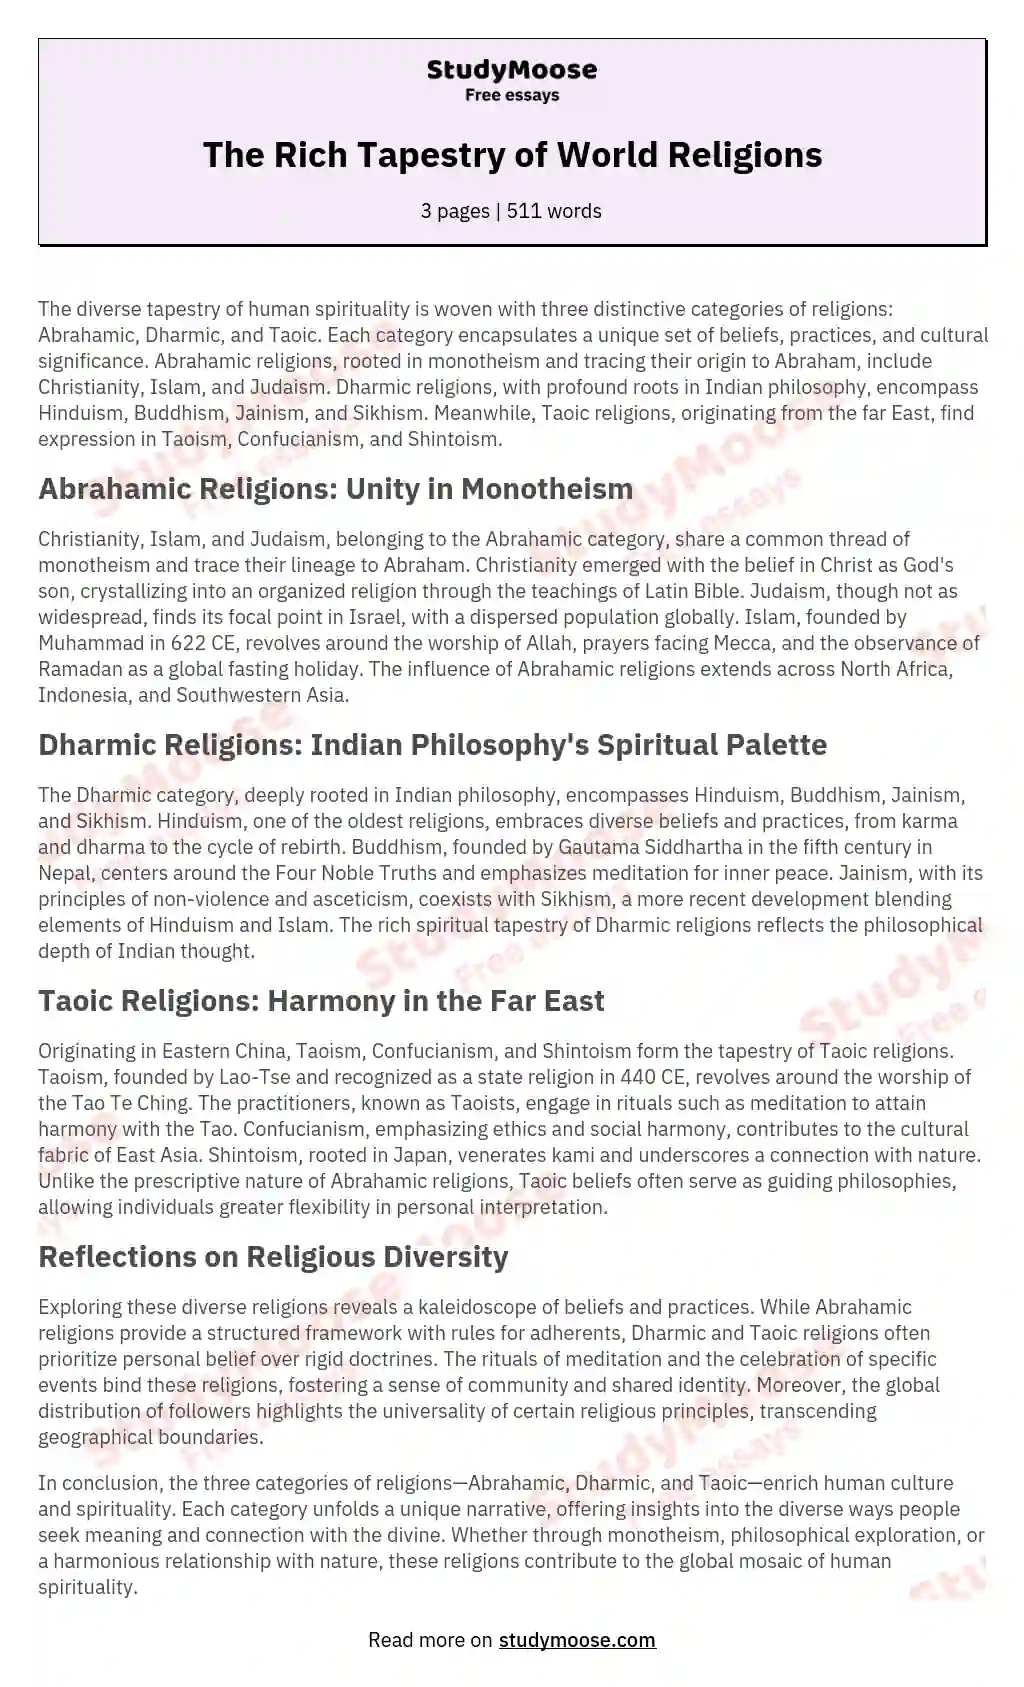 The Rich Tapestry of World Religions essay